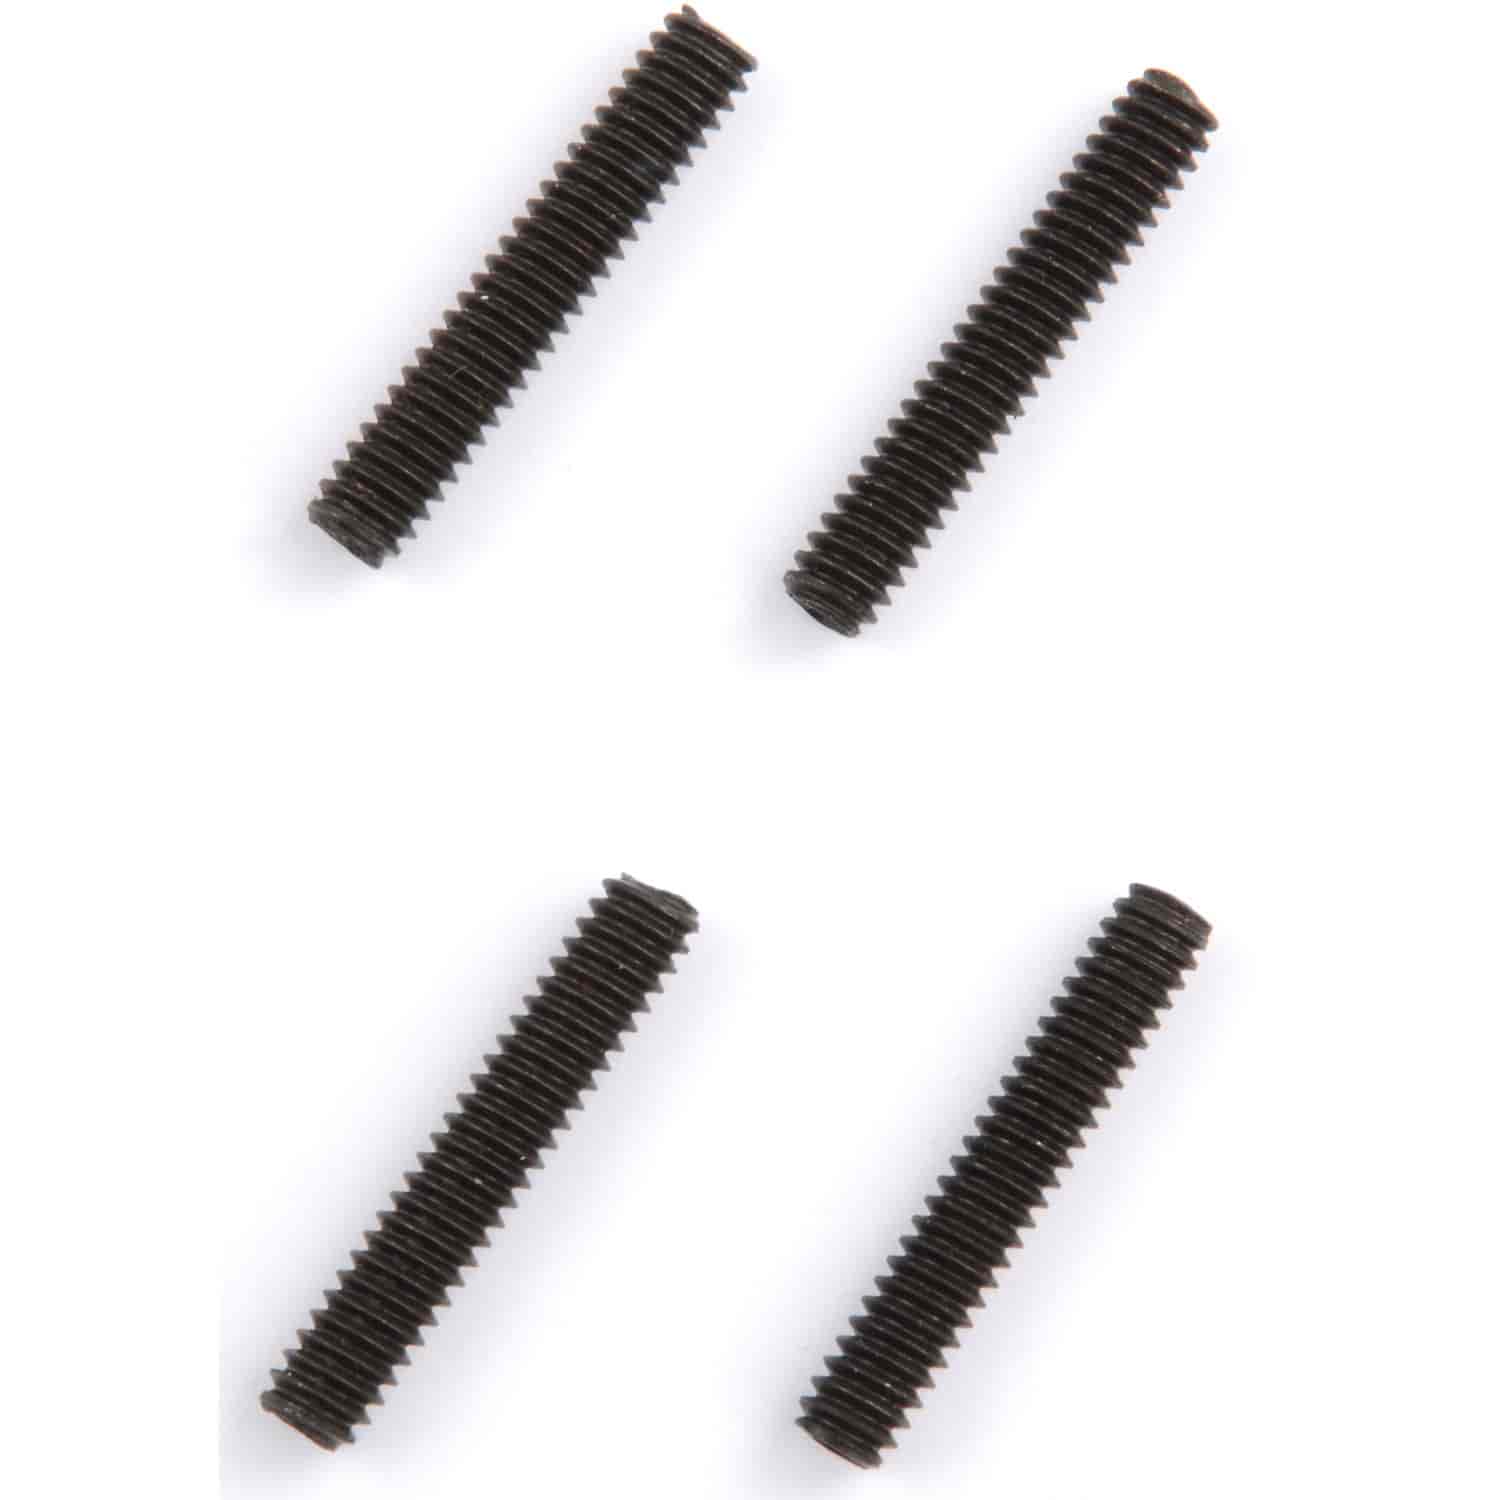 Replacement T-Bar Nut Studs 1/4" -20 x 1-3/8"